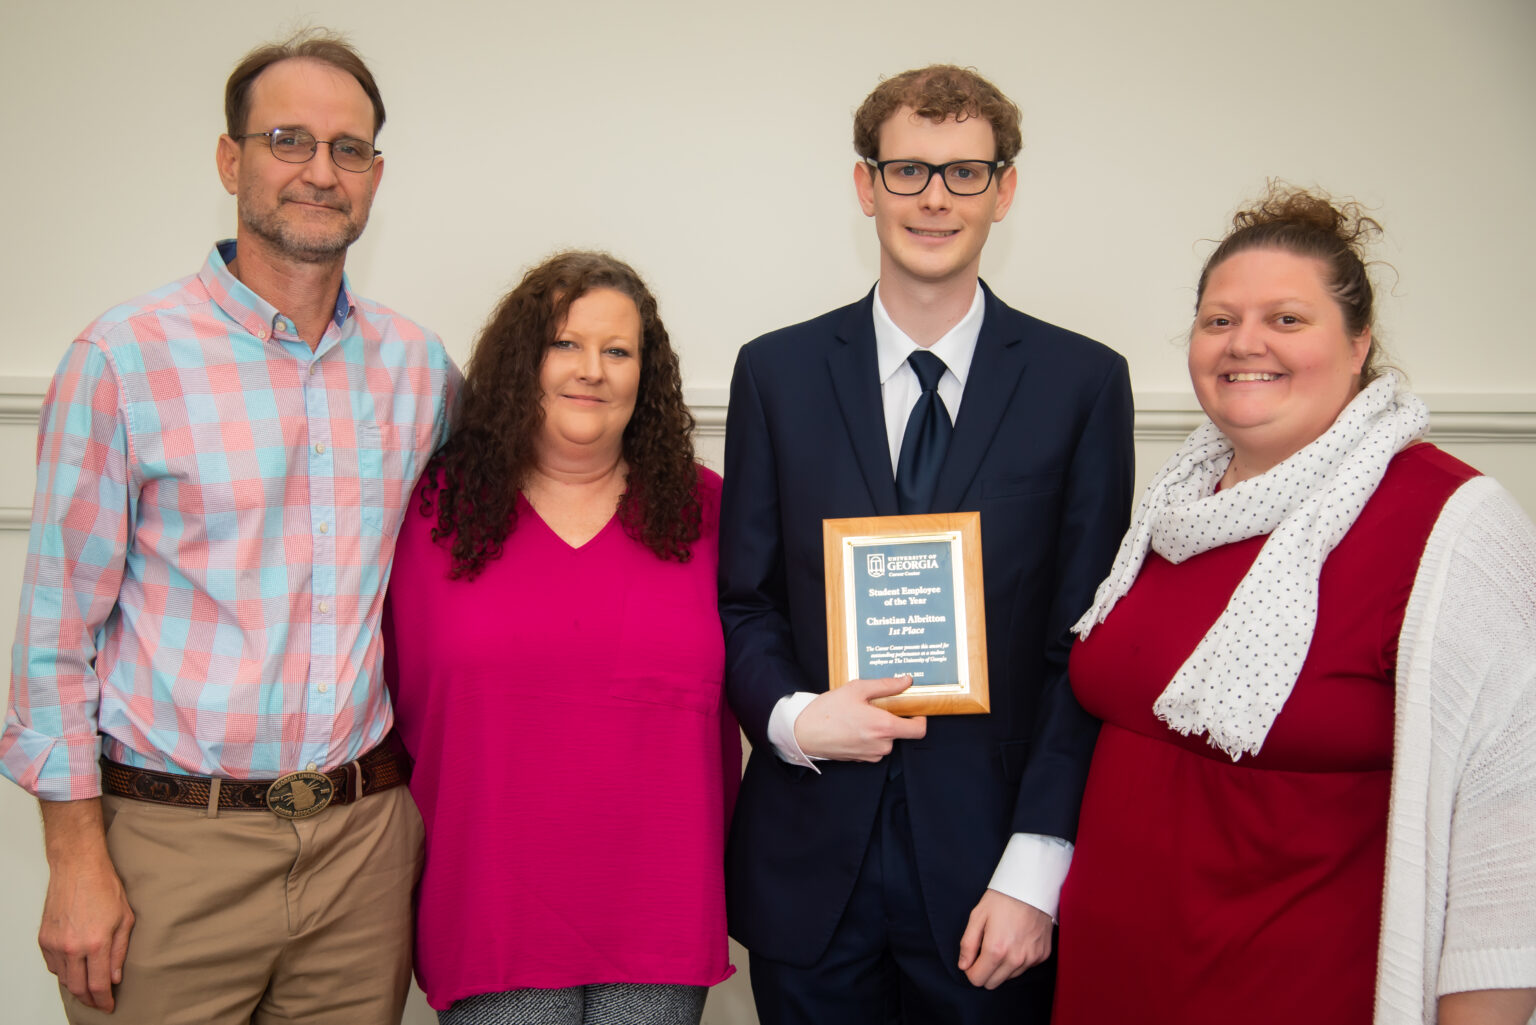 Shown, from left, are parents Chad and Tabby Albritton, UGA Student Employee of the Year Christian Albritton, and nominator UGA Extension 4-H Specialist Kasey Bozeman. (Photo by Justin Evans)